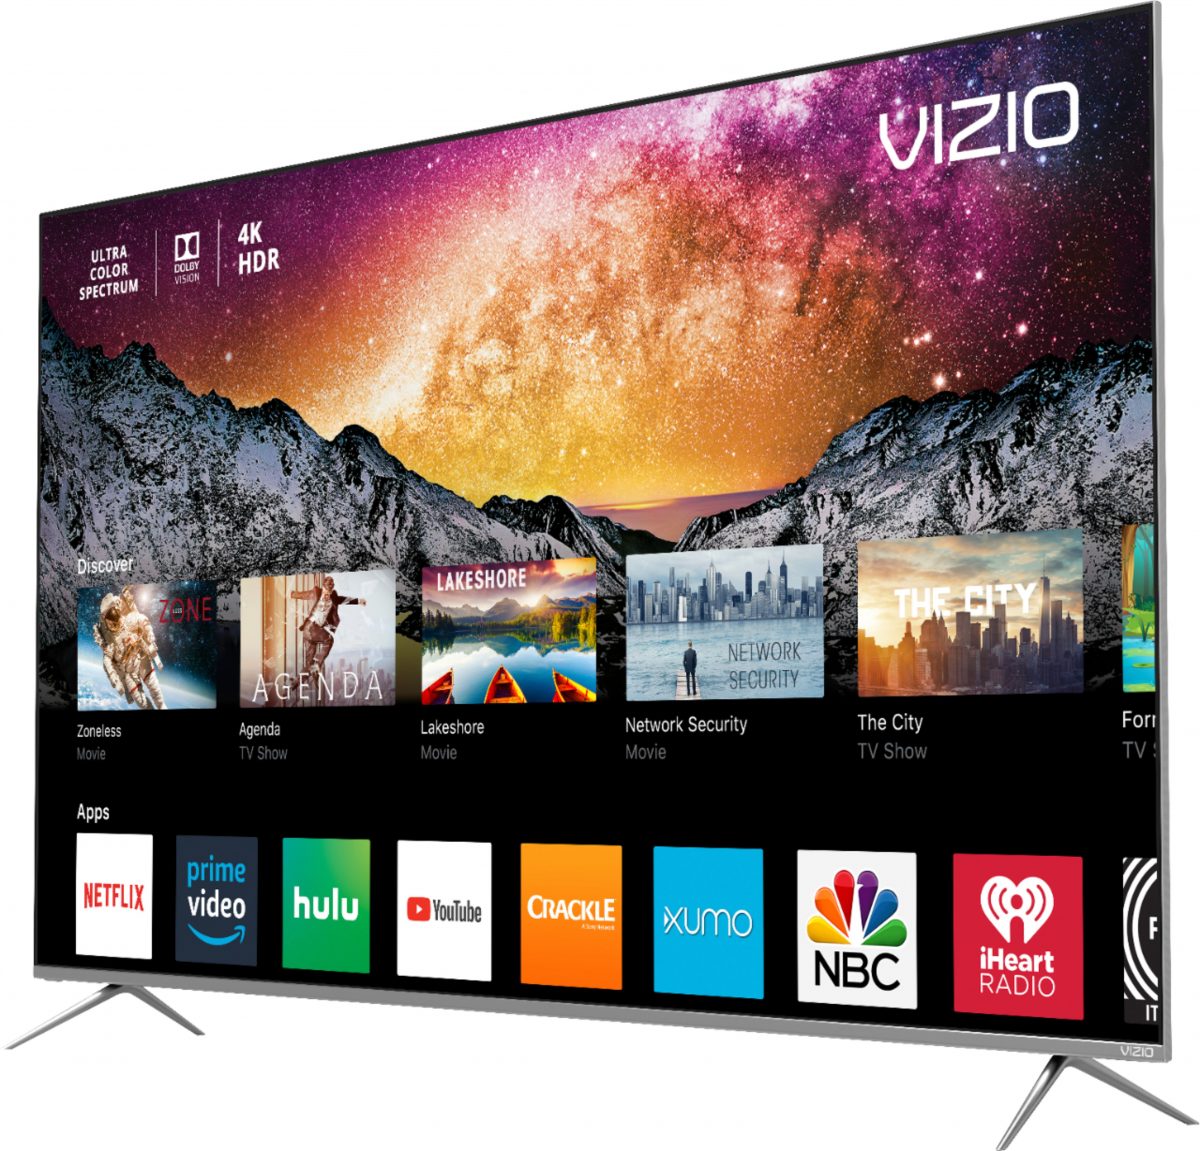 The Holidays are a Great Time to Upgrade to the VIZIO P-Series 4K HDR Smart TV